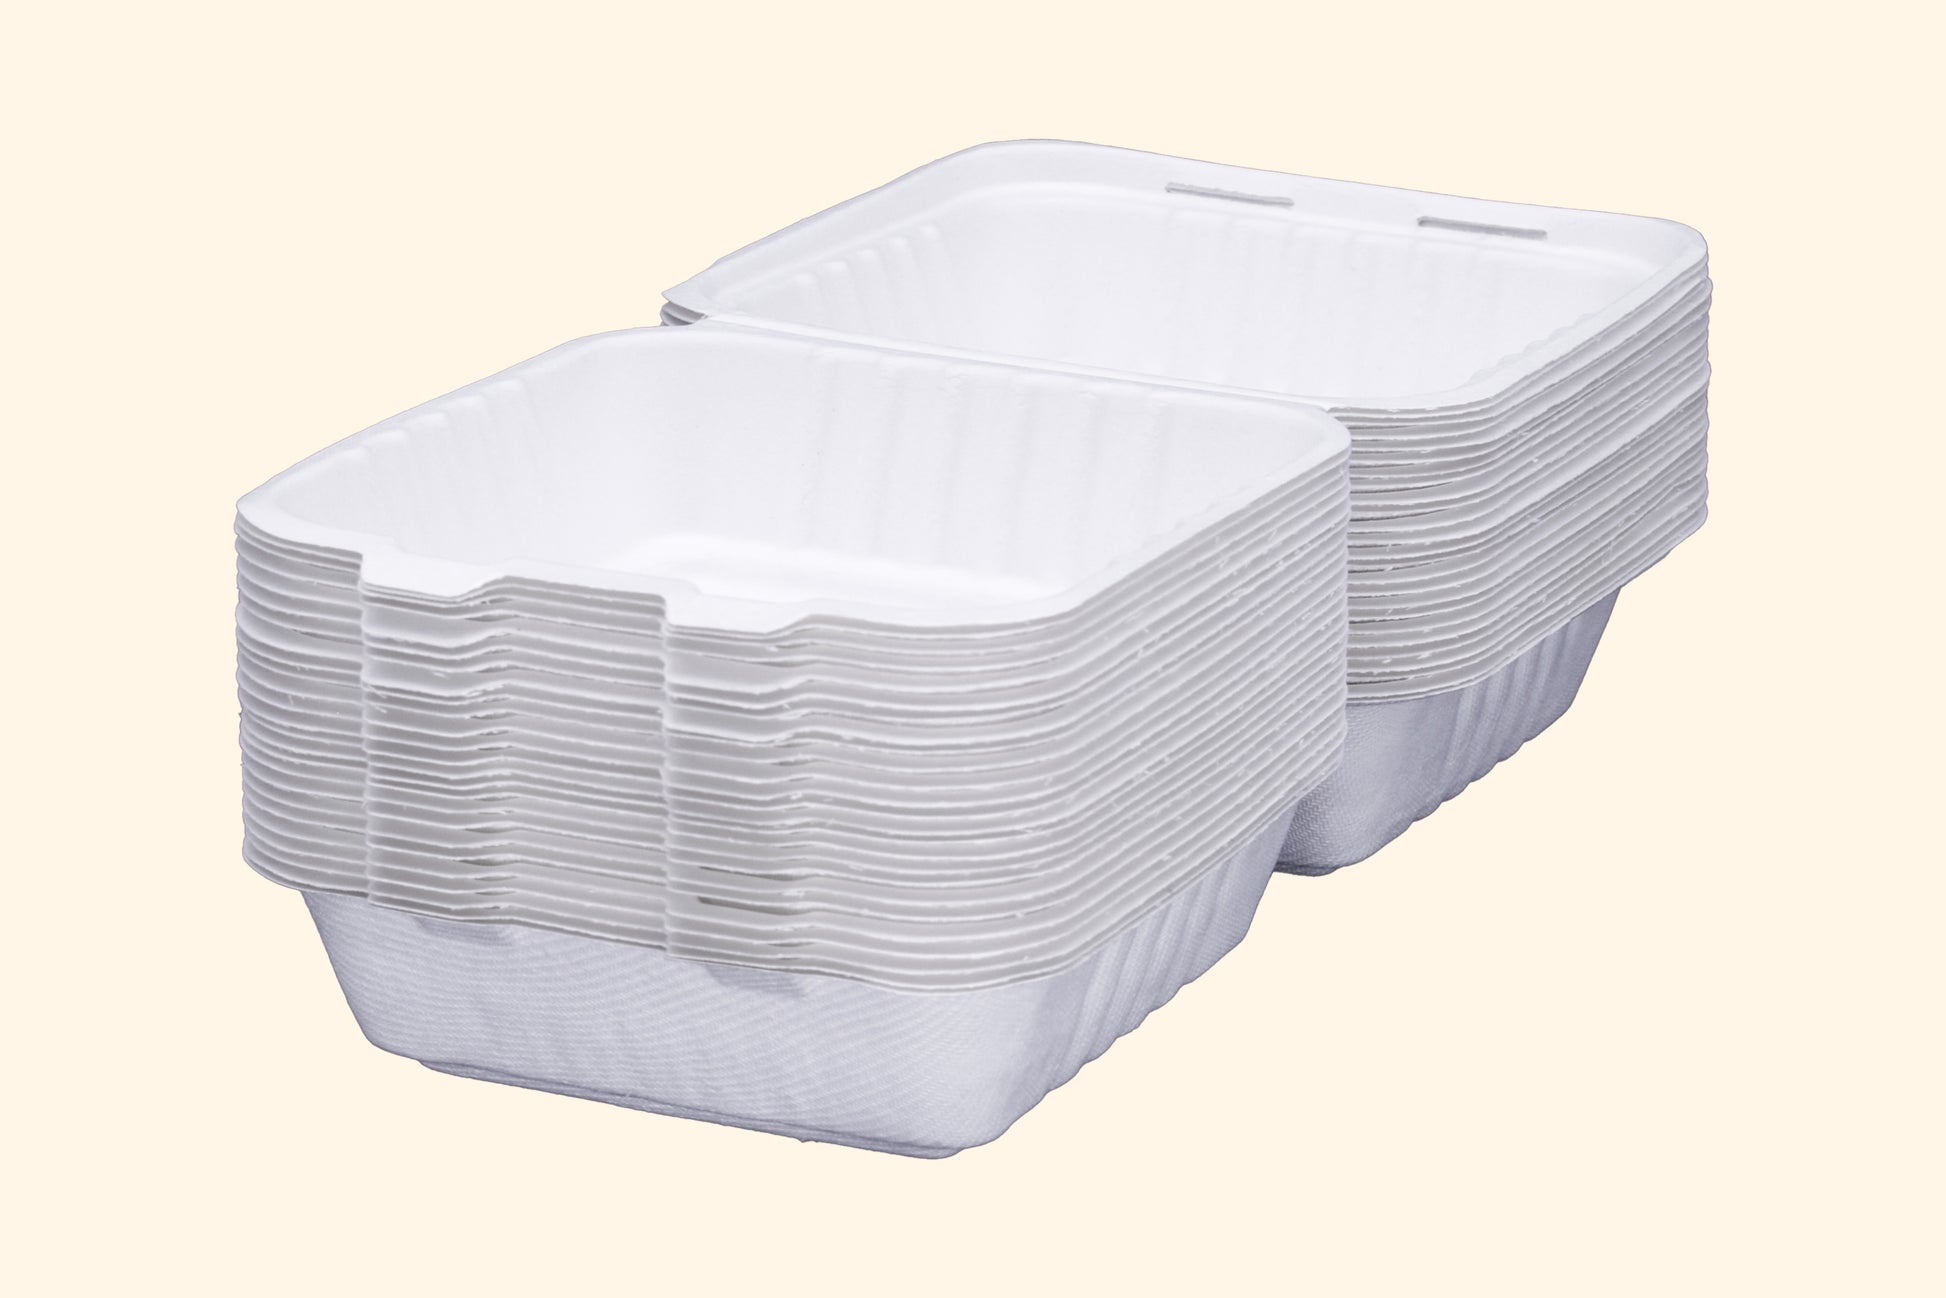 6x6-Inch-Clamshells-Compostable-Sugarcane-Bagasse-Clamshell